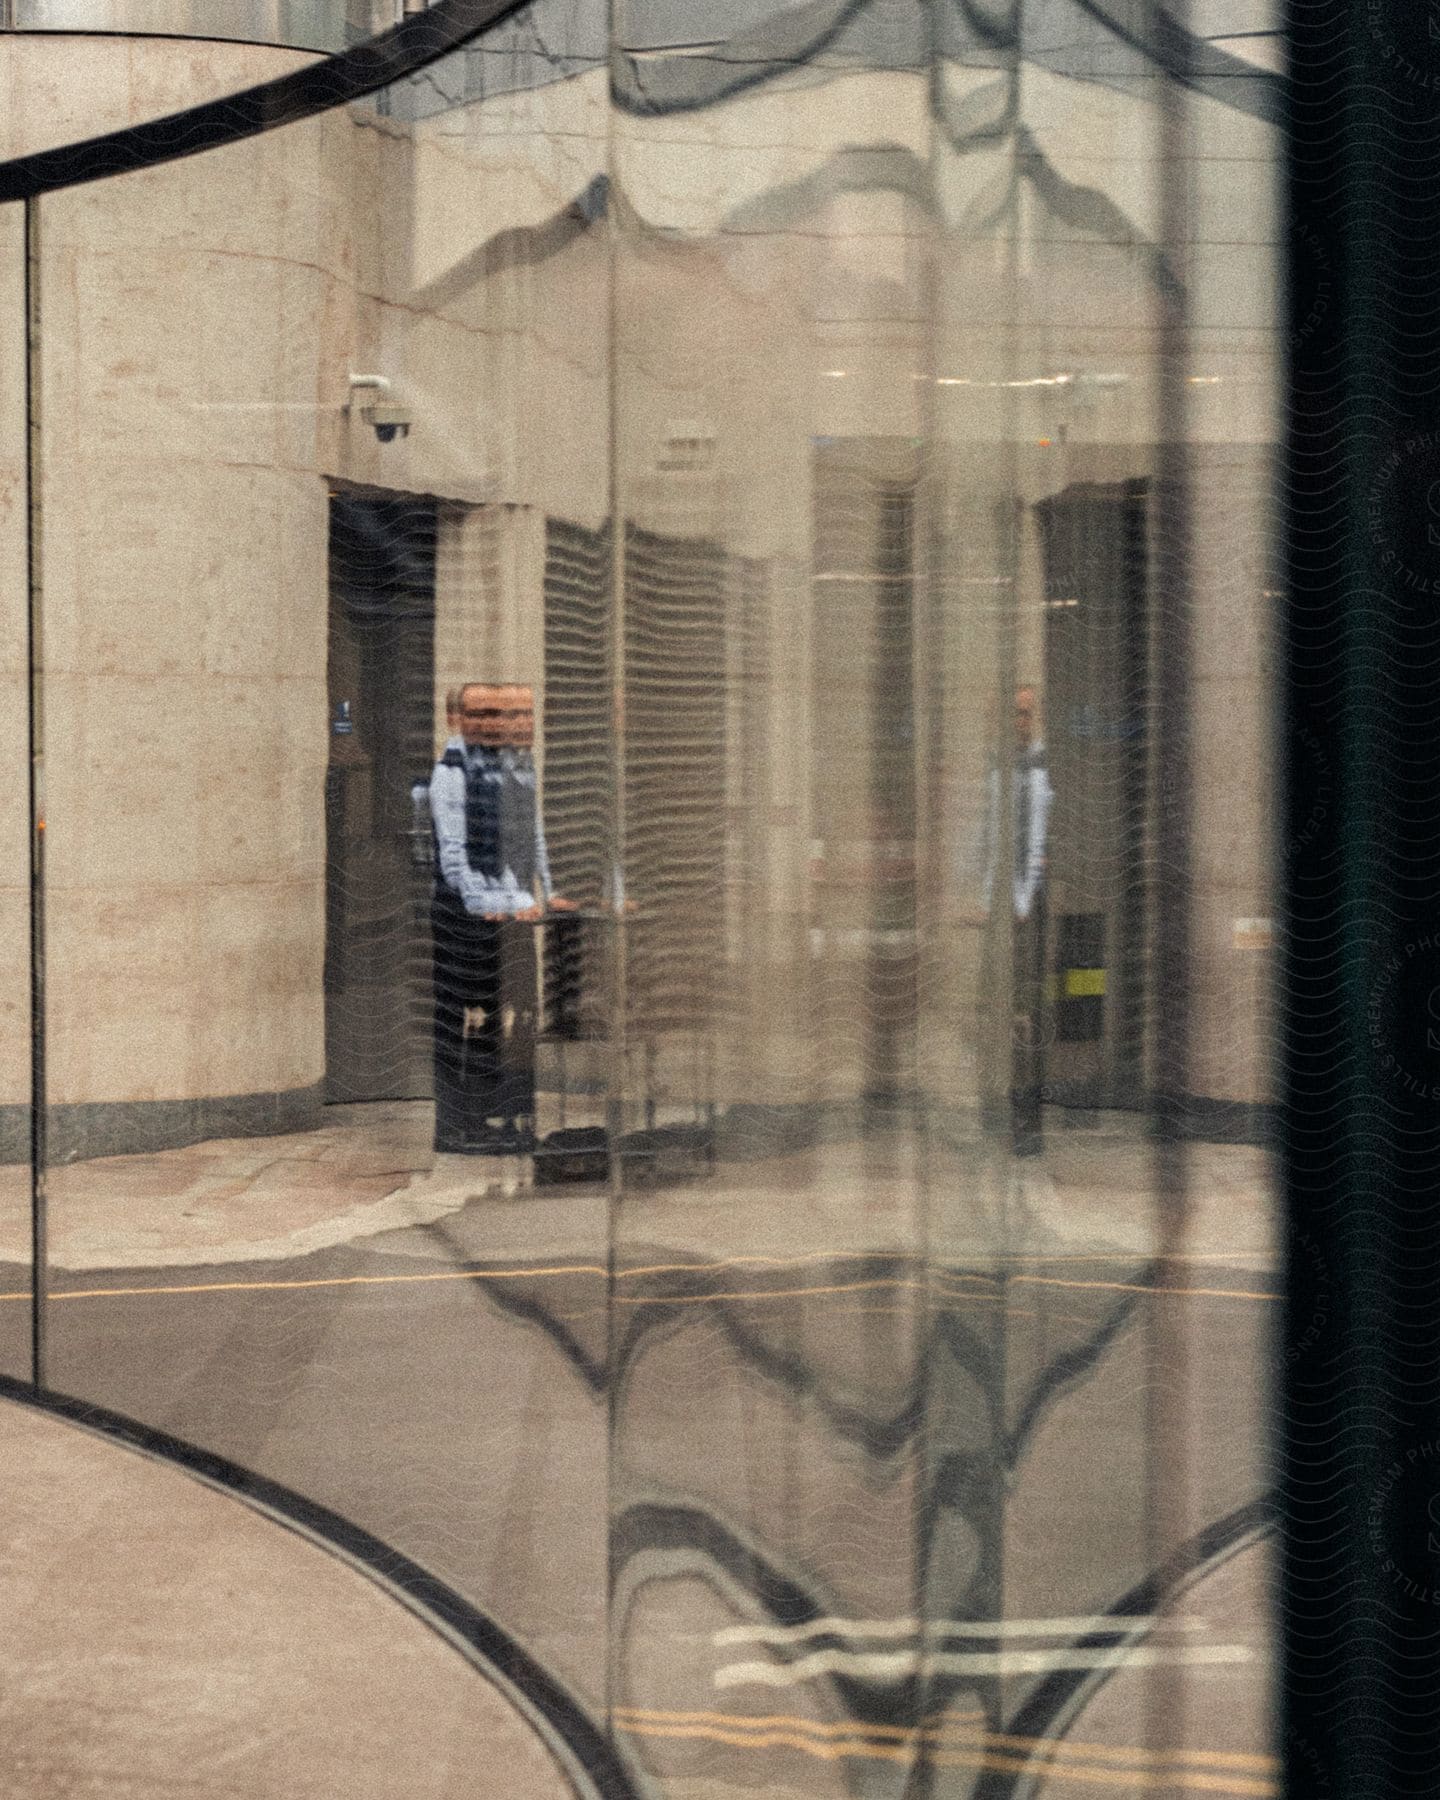 A blurry double view of a man standing outside of a building through curved glass